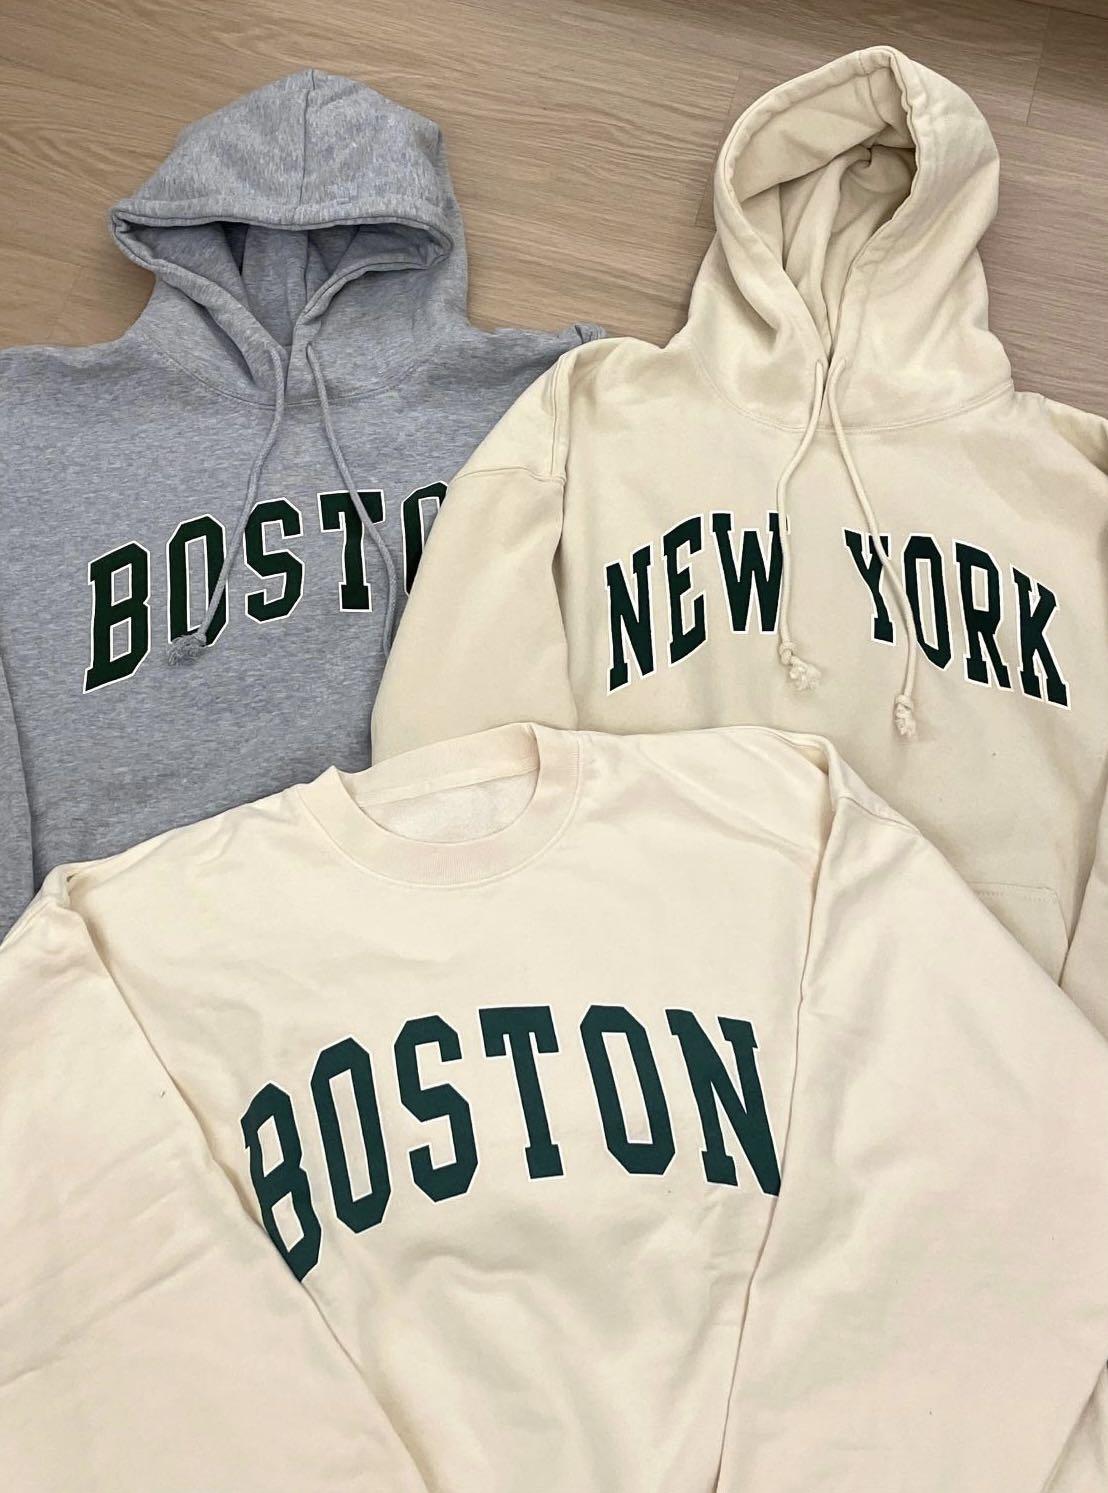 Brandy Melville New York Hoodie White - $32 (33% Off Retail) - From Erica